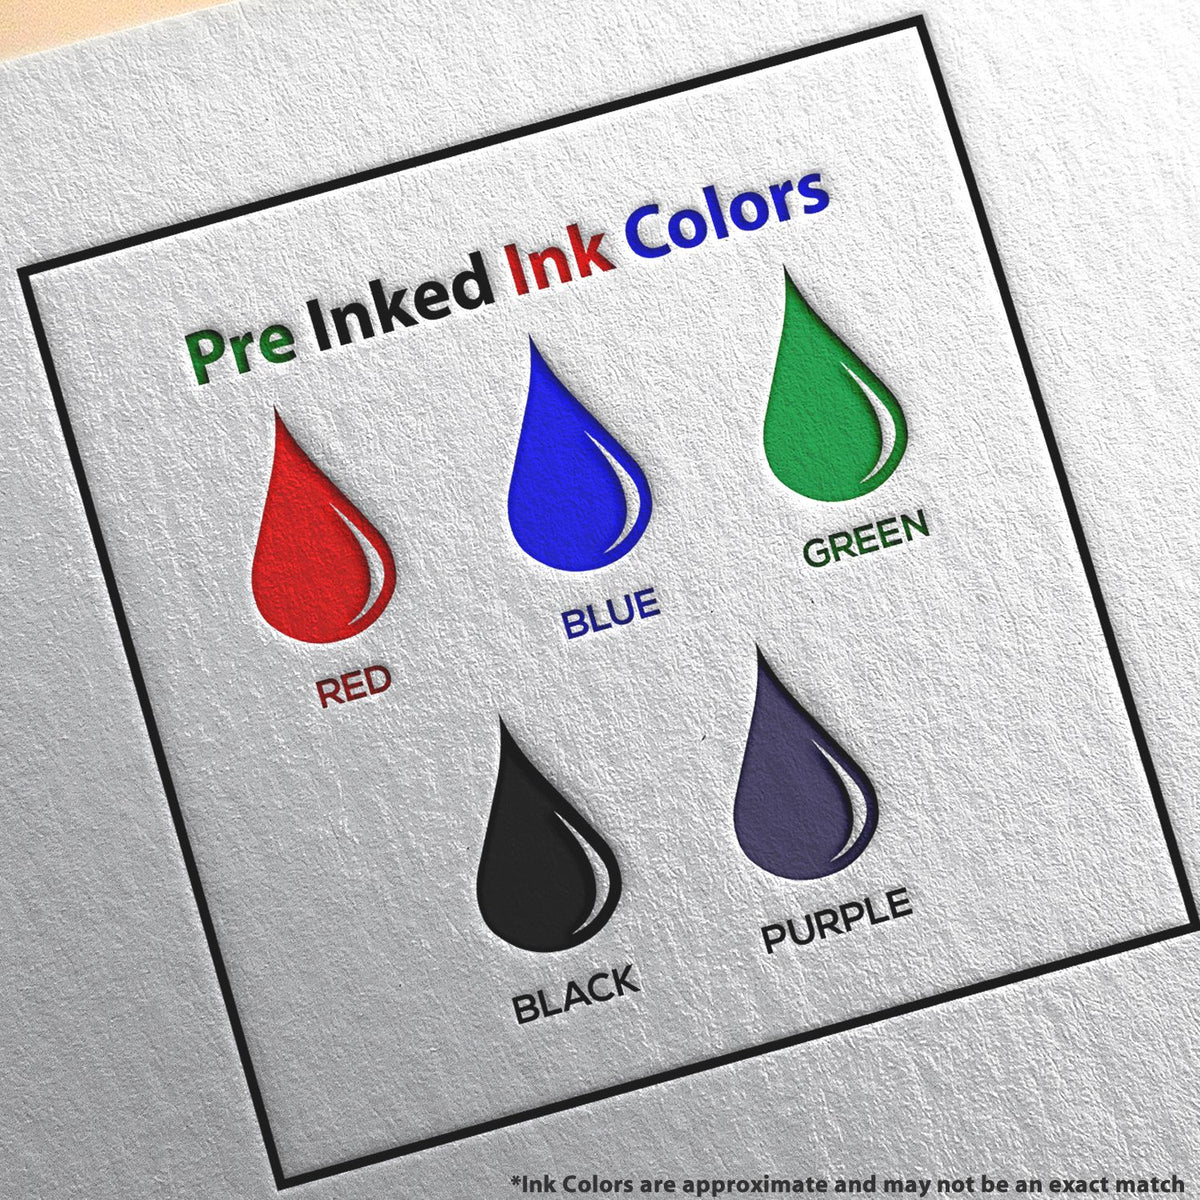 A picture showing the different ink colors or hues available for the Slim Pre-Inked California Professional Engineer Seal Stamp product.